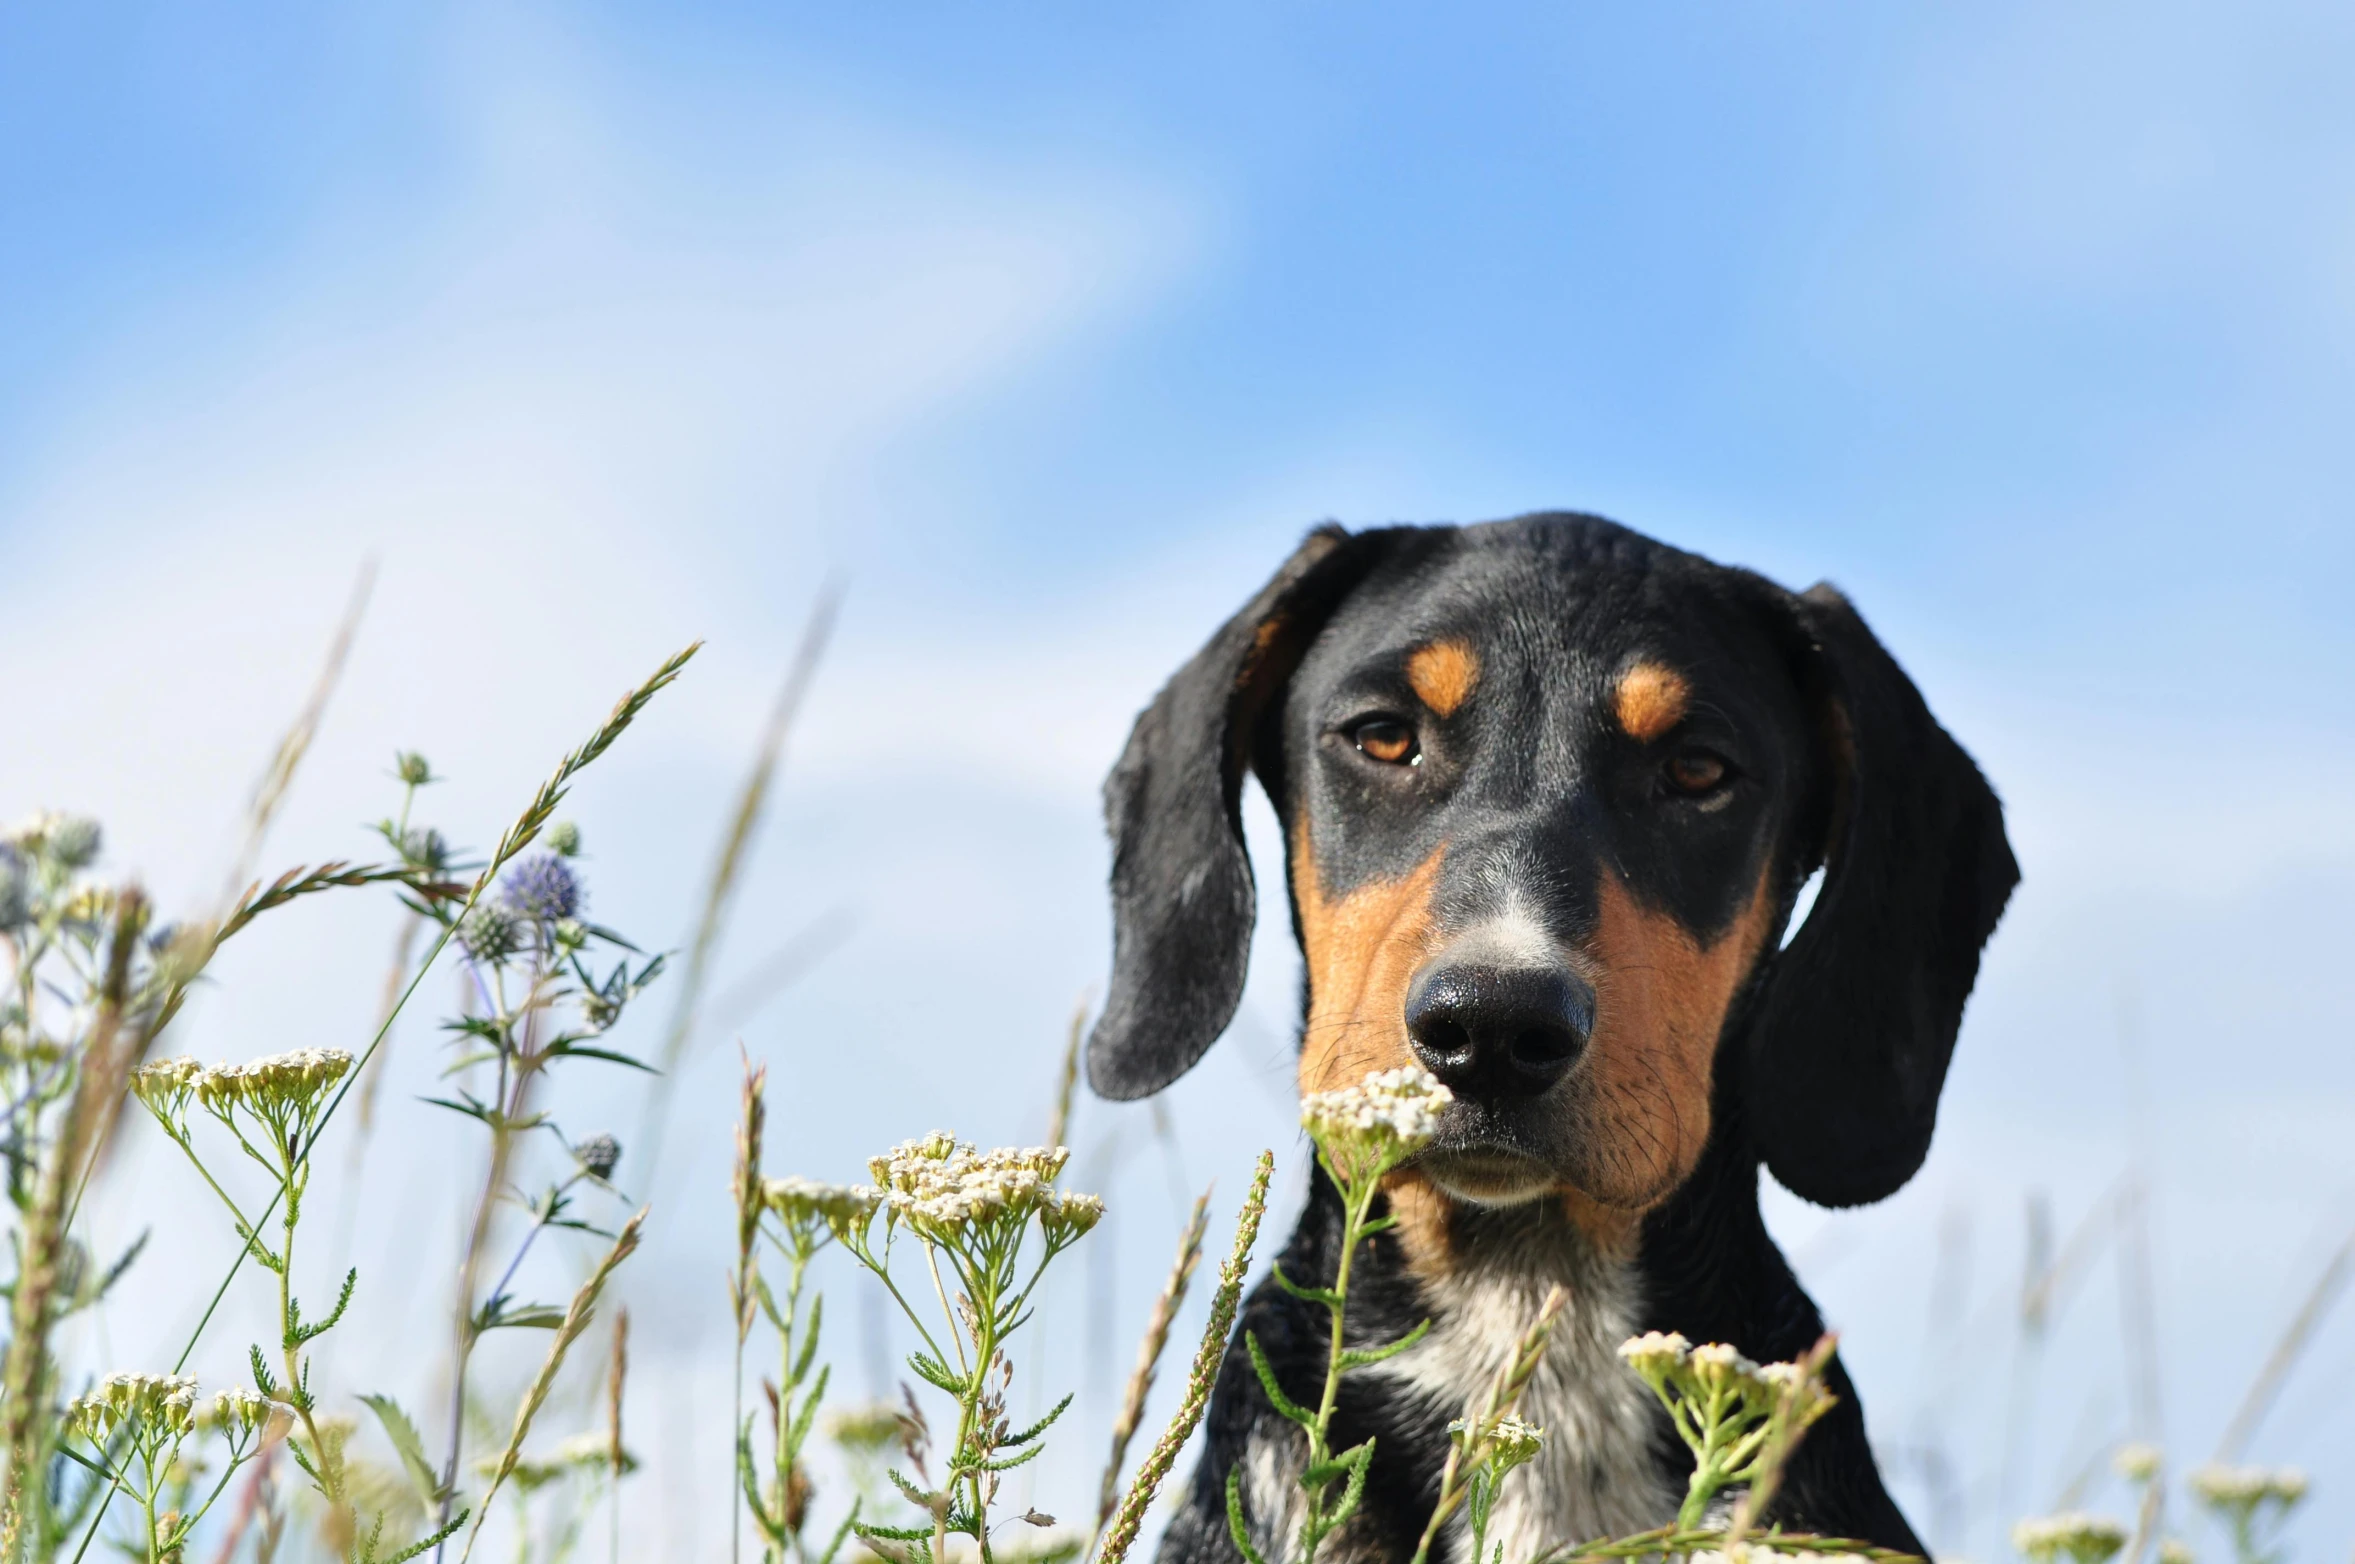 a dog sitting in a grassy field staring at the camera